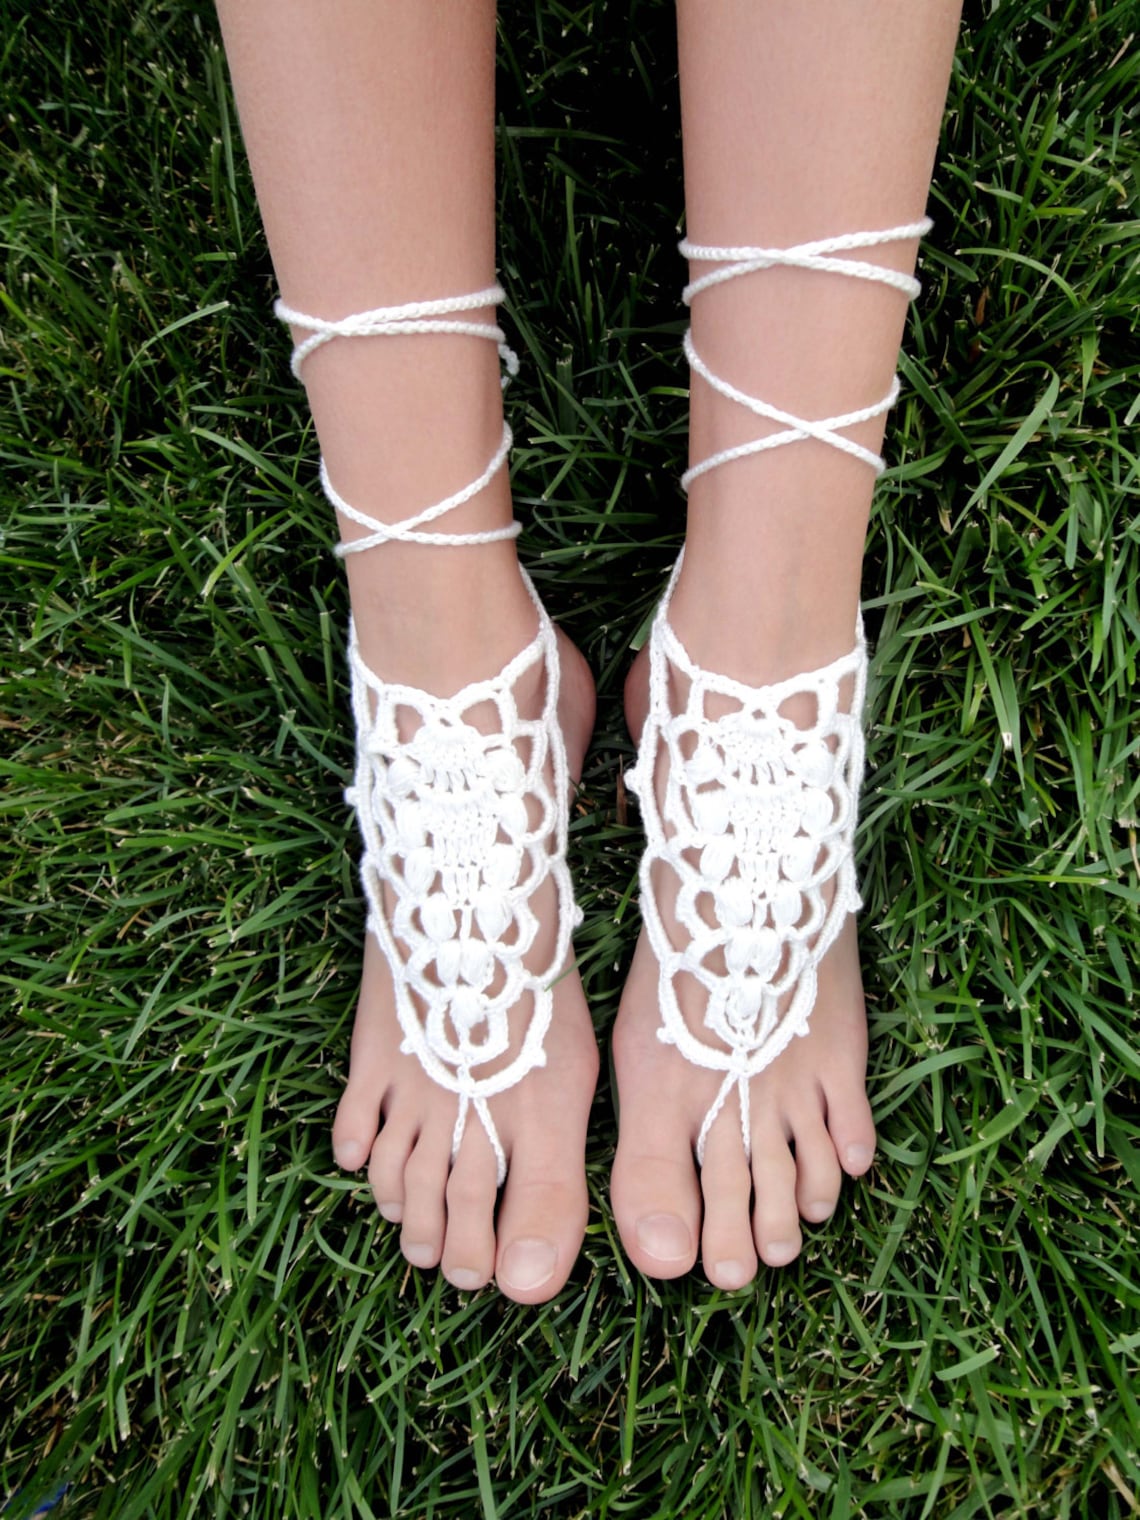 Crochet Barefoot Sandals. White or 27 Colors. Woman's Foot | Etsy